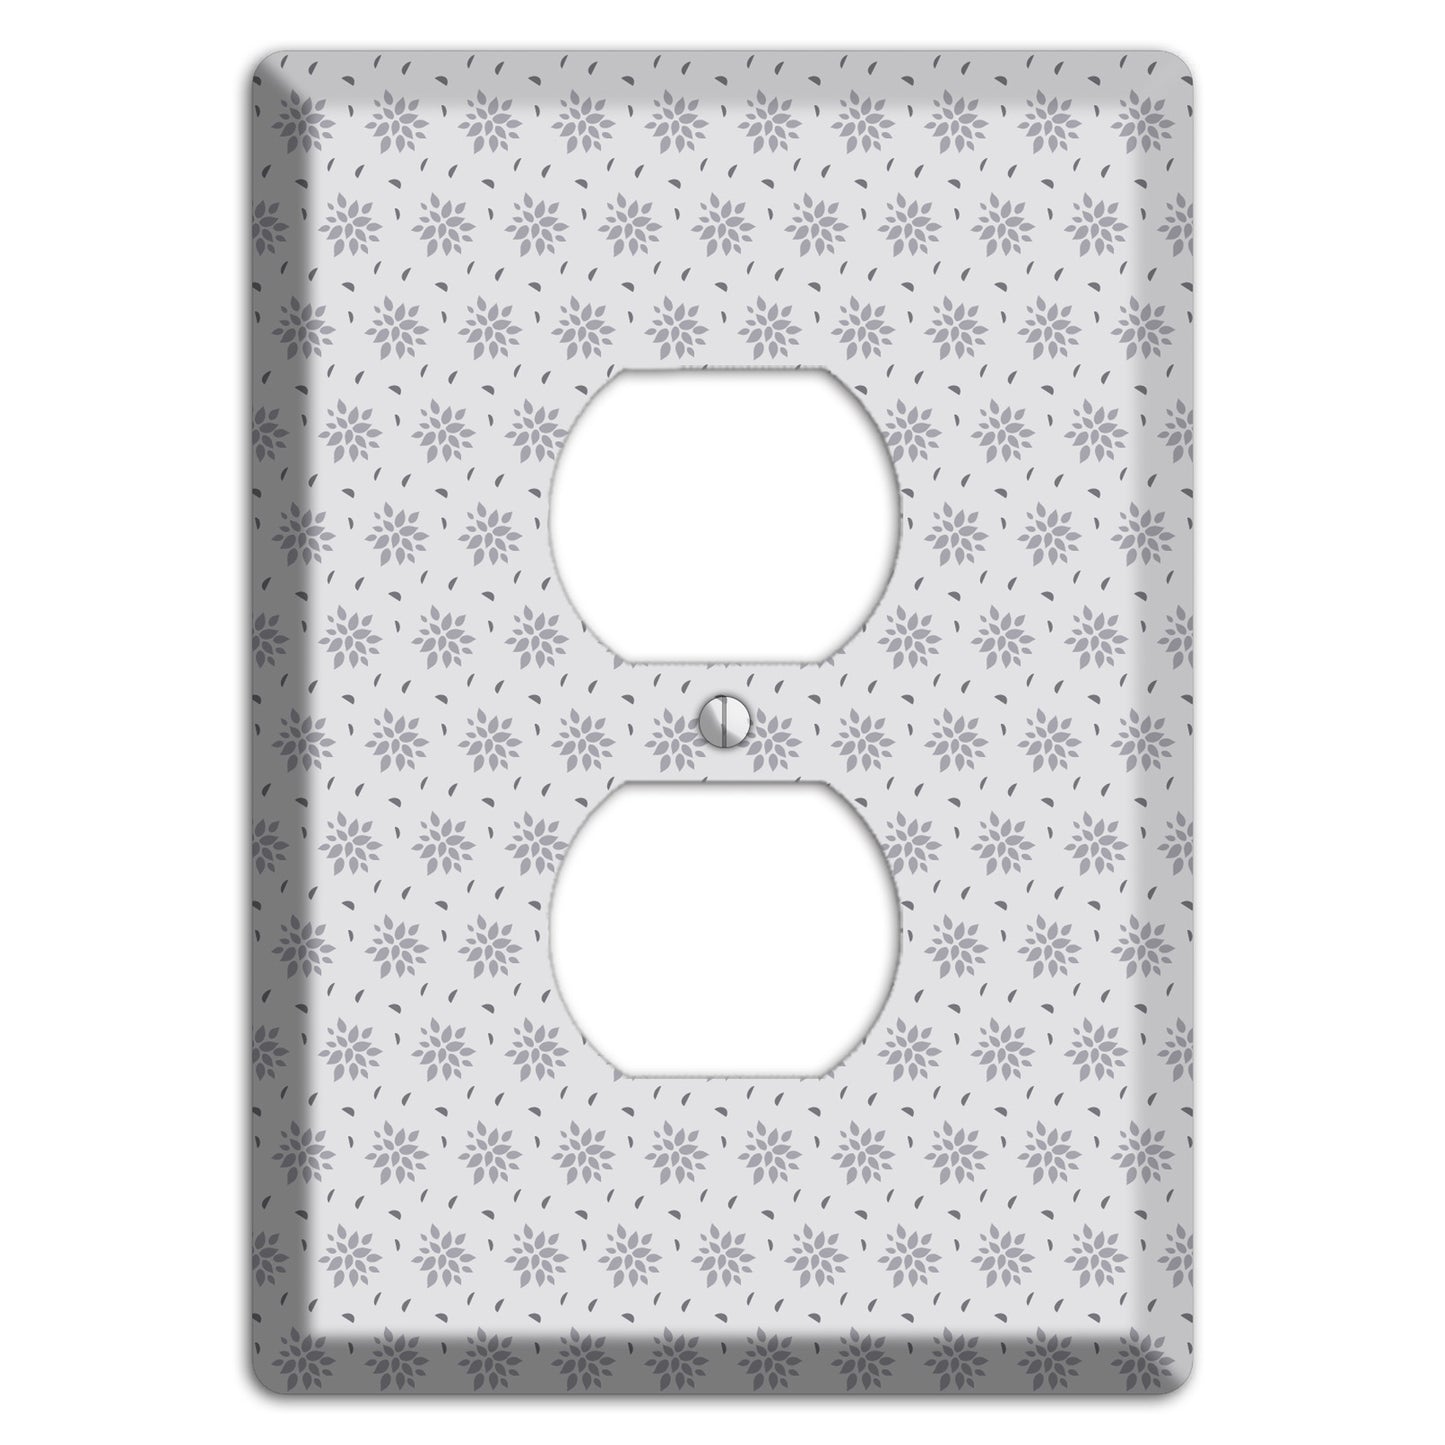 Multi Grey Calico Duplex Outlet Wallplate